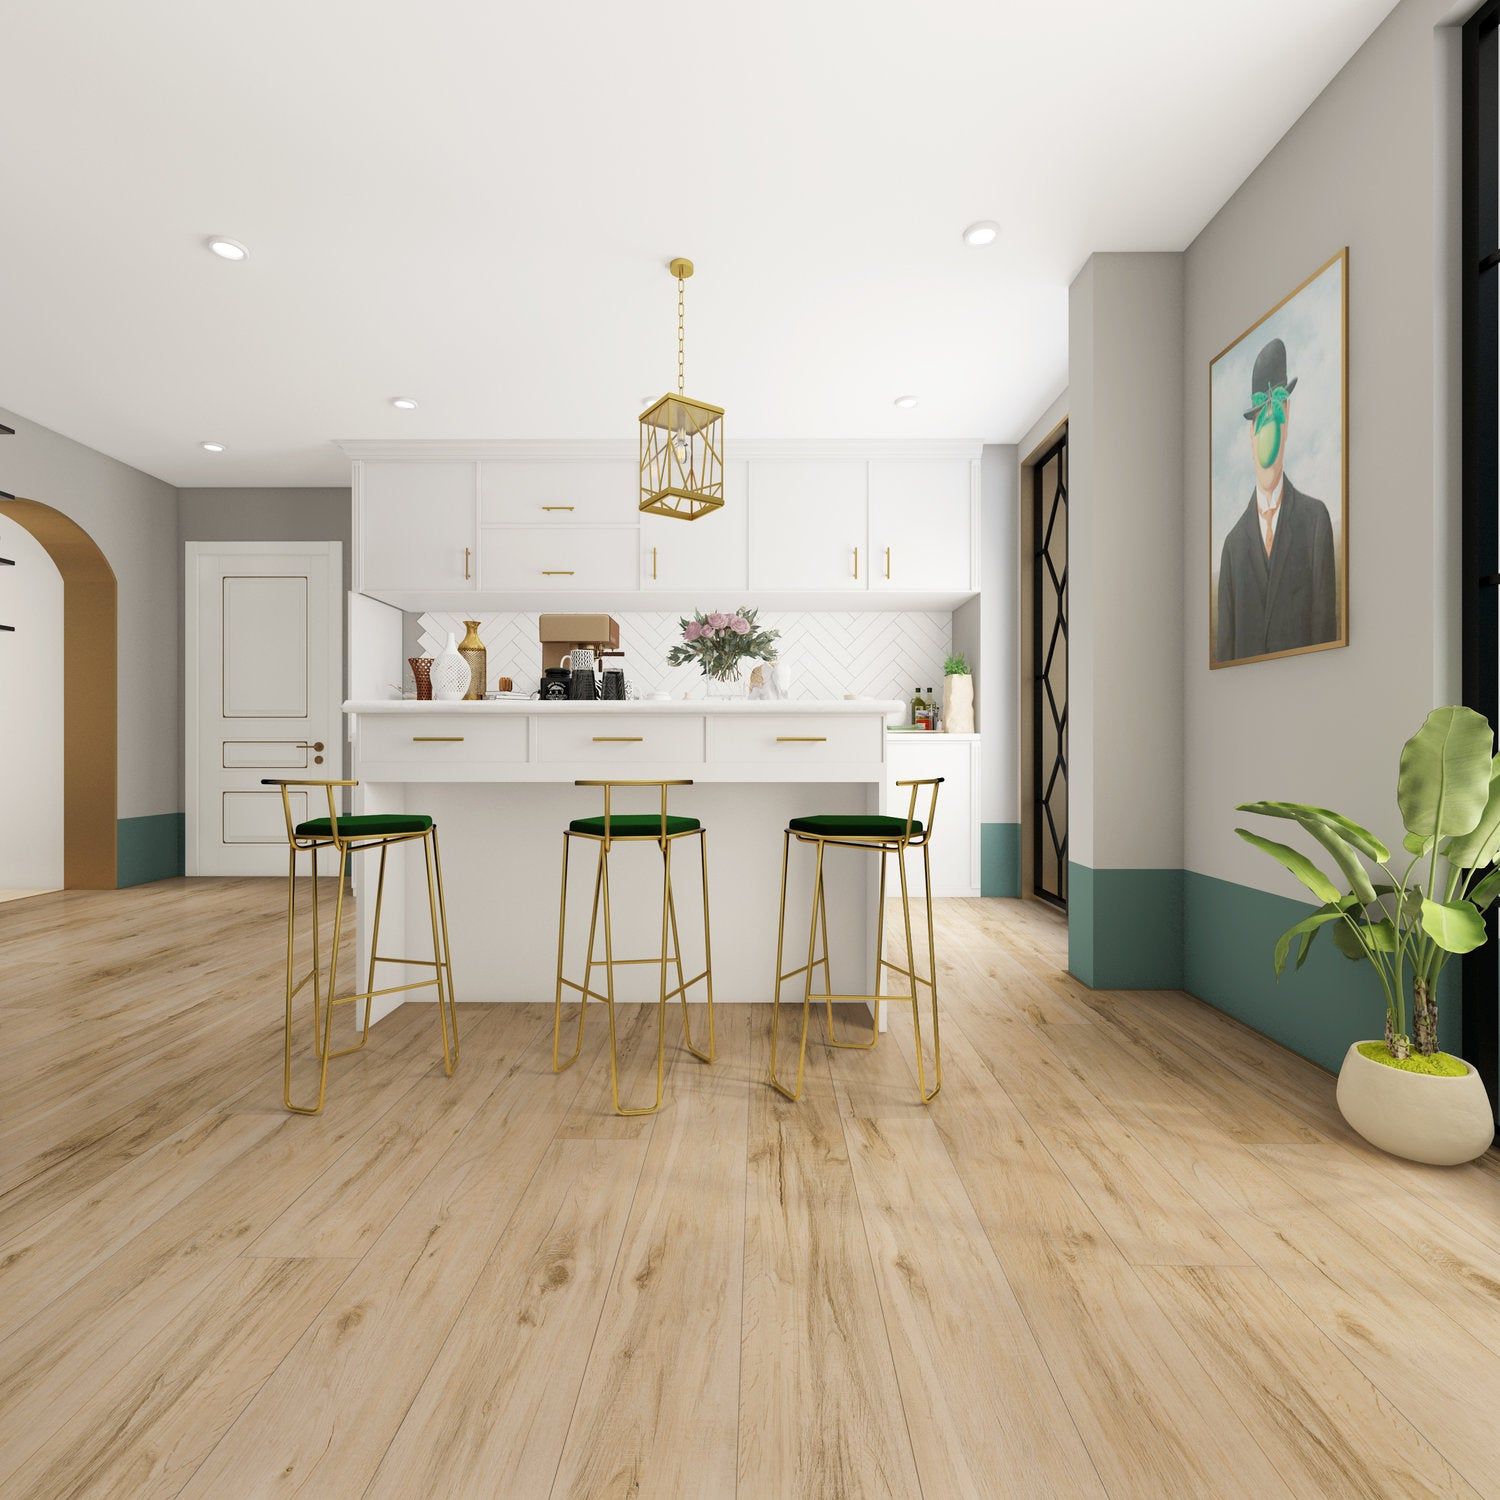 New kitchen flooring options for your kitchen